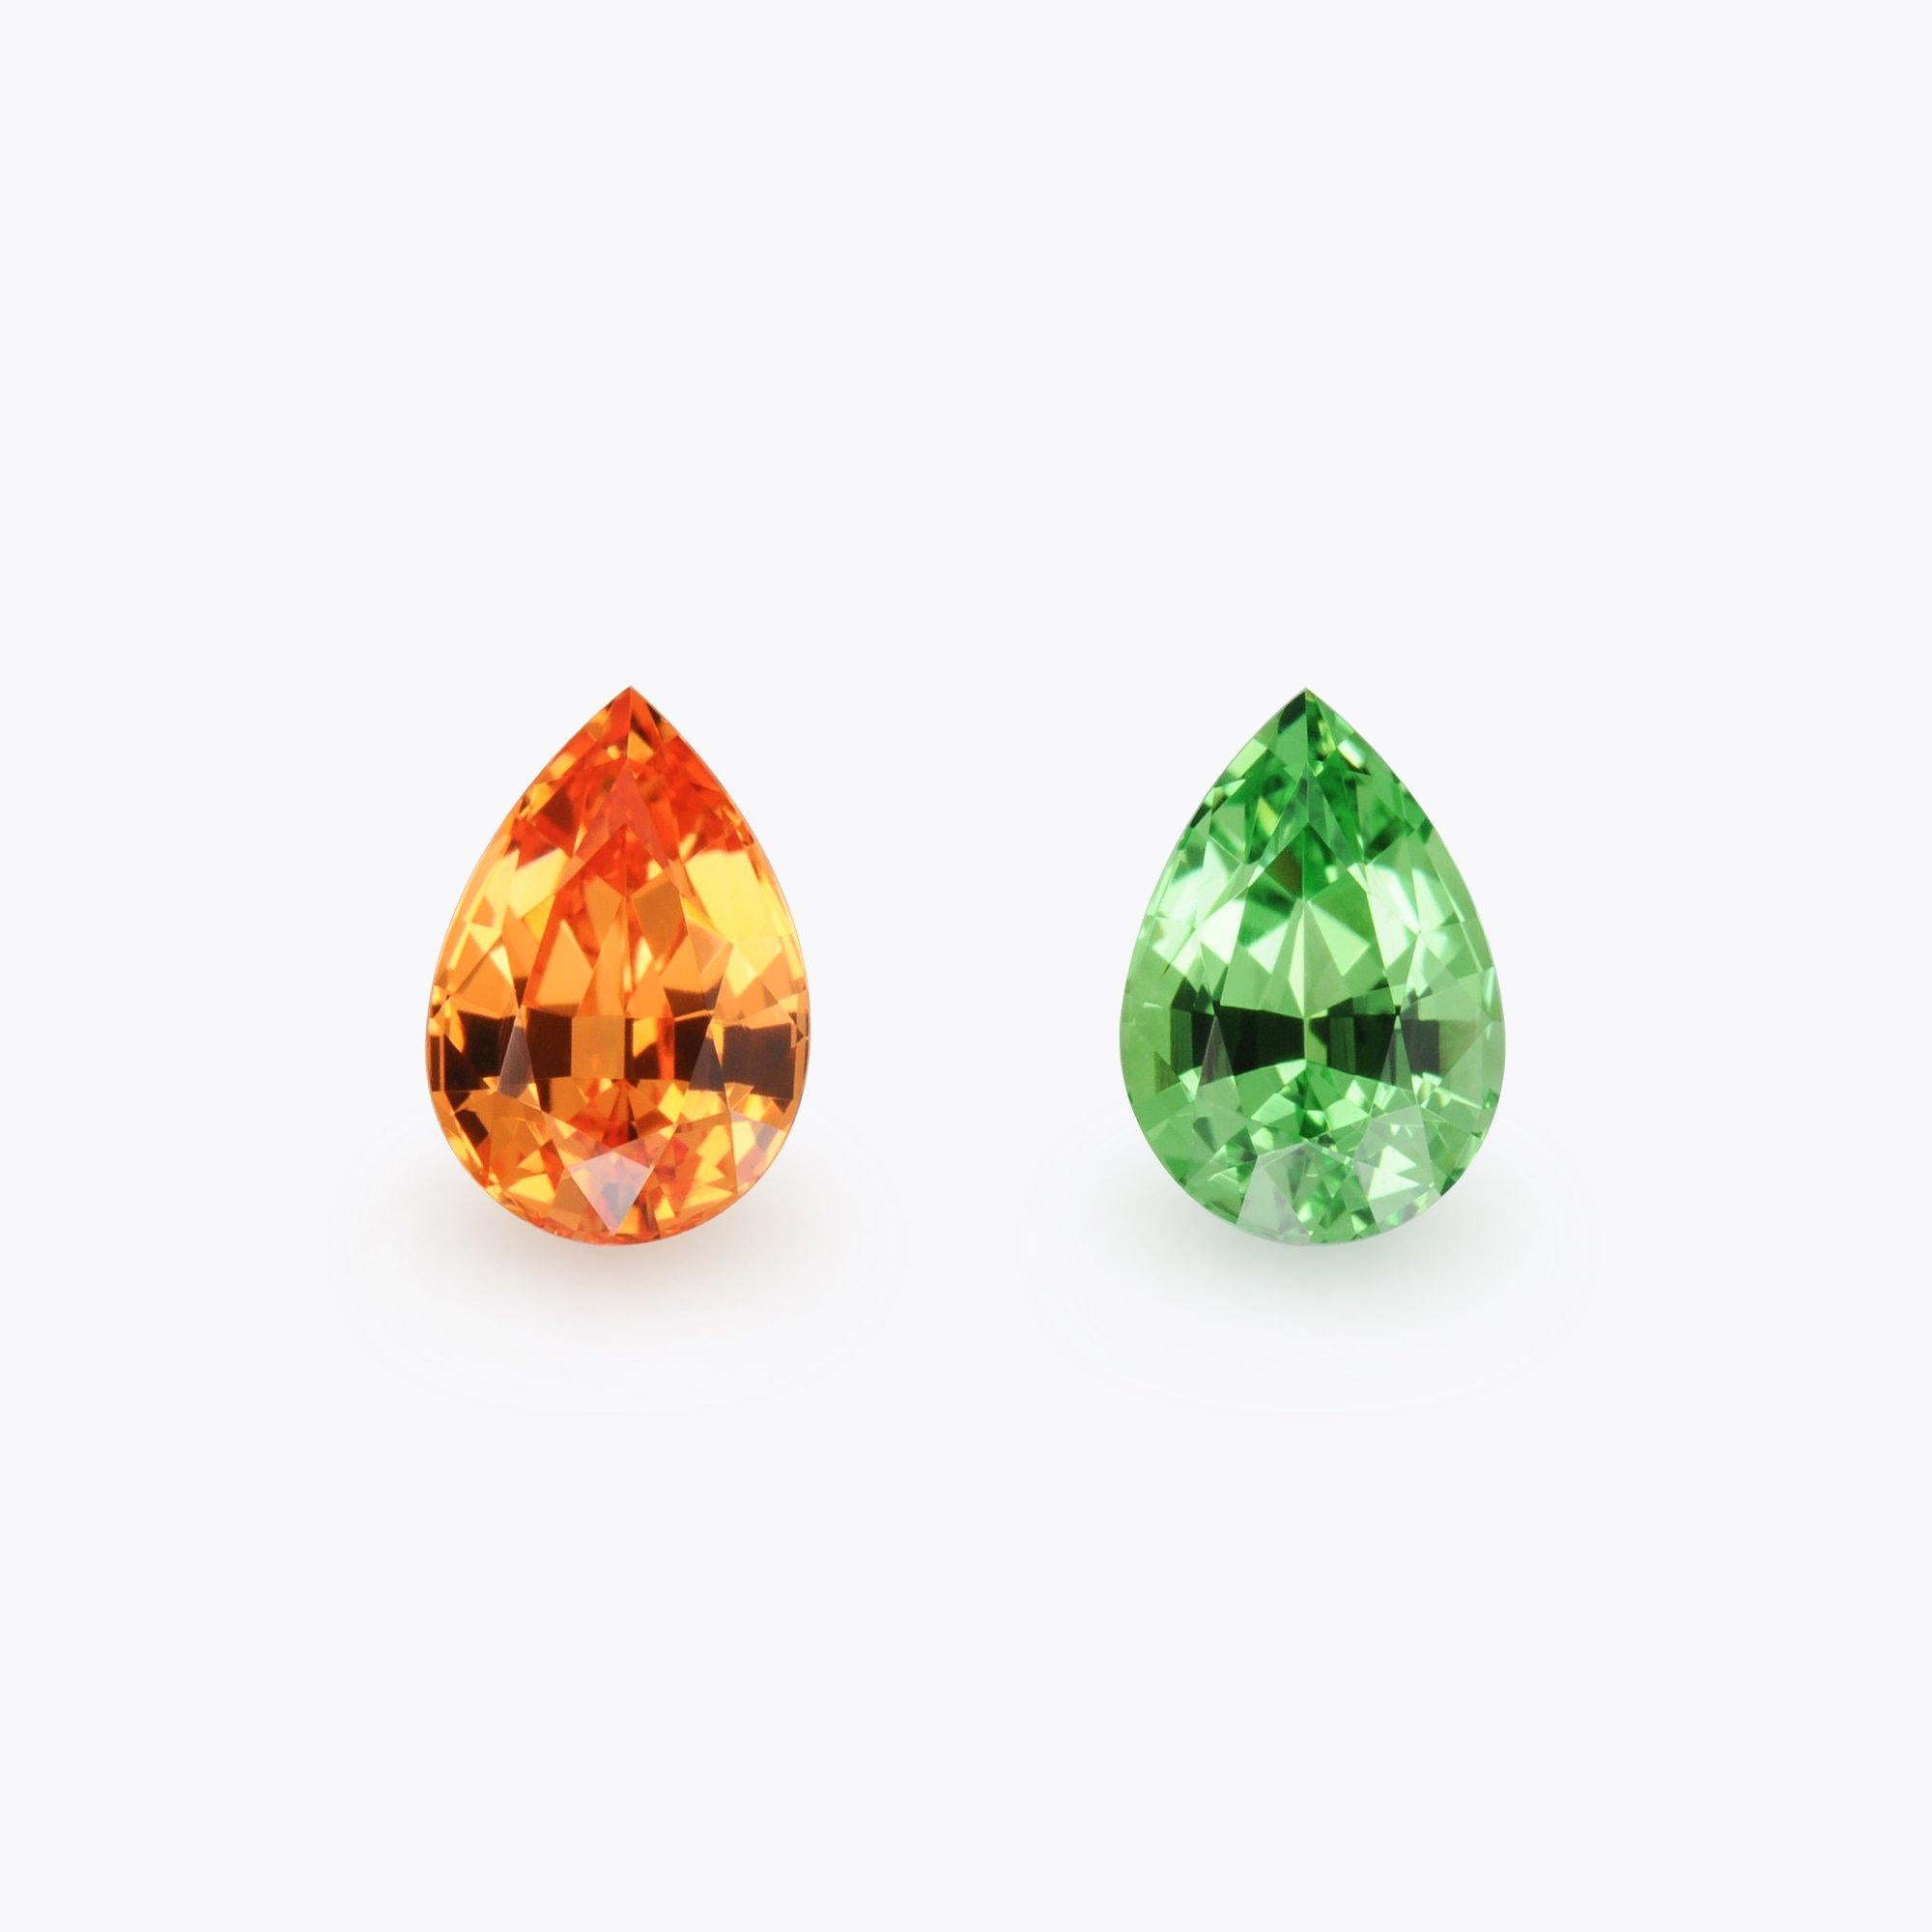 Mesmerizing Tsavorite and Mandarin Garnet 2.01 carat pear shaped earrings pair, offered loose to an elegant lady.
These vibrant gems would make a perfect mismatch pair of earrings or a unique vertical ring.
Returns are accepted and paid by us within